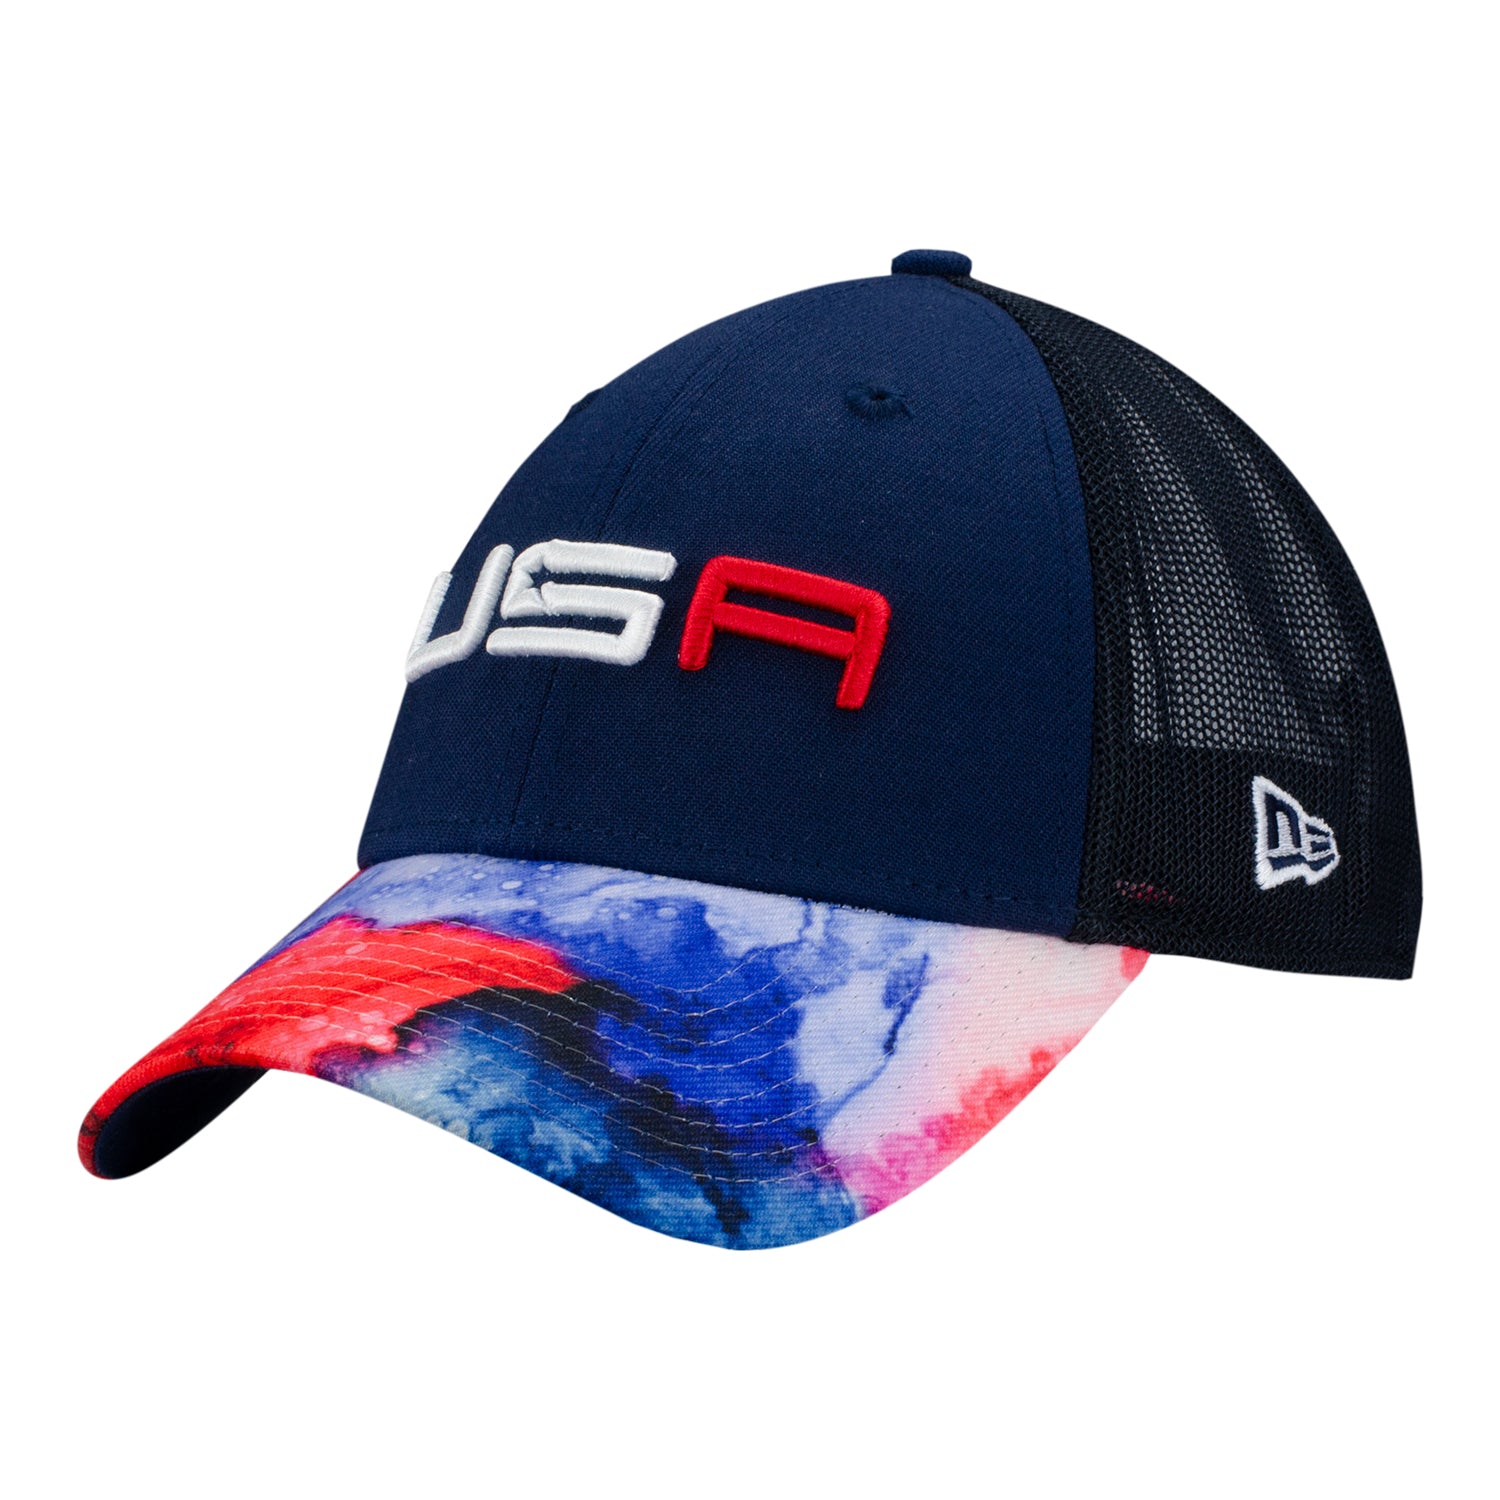 Ryder Cup Hats - US Ryder Cup